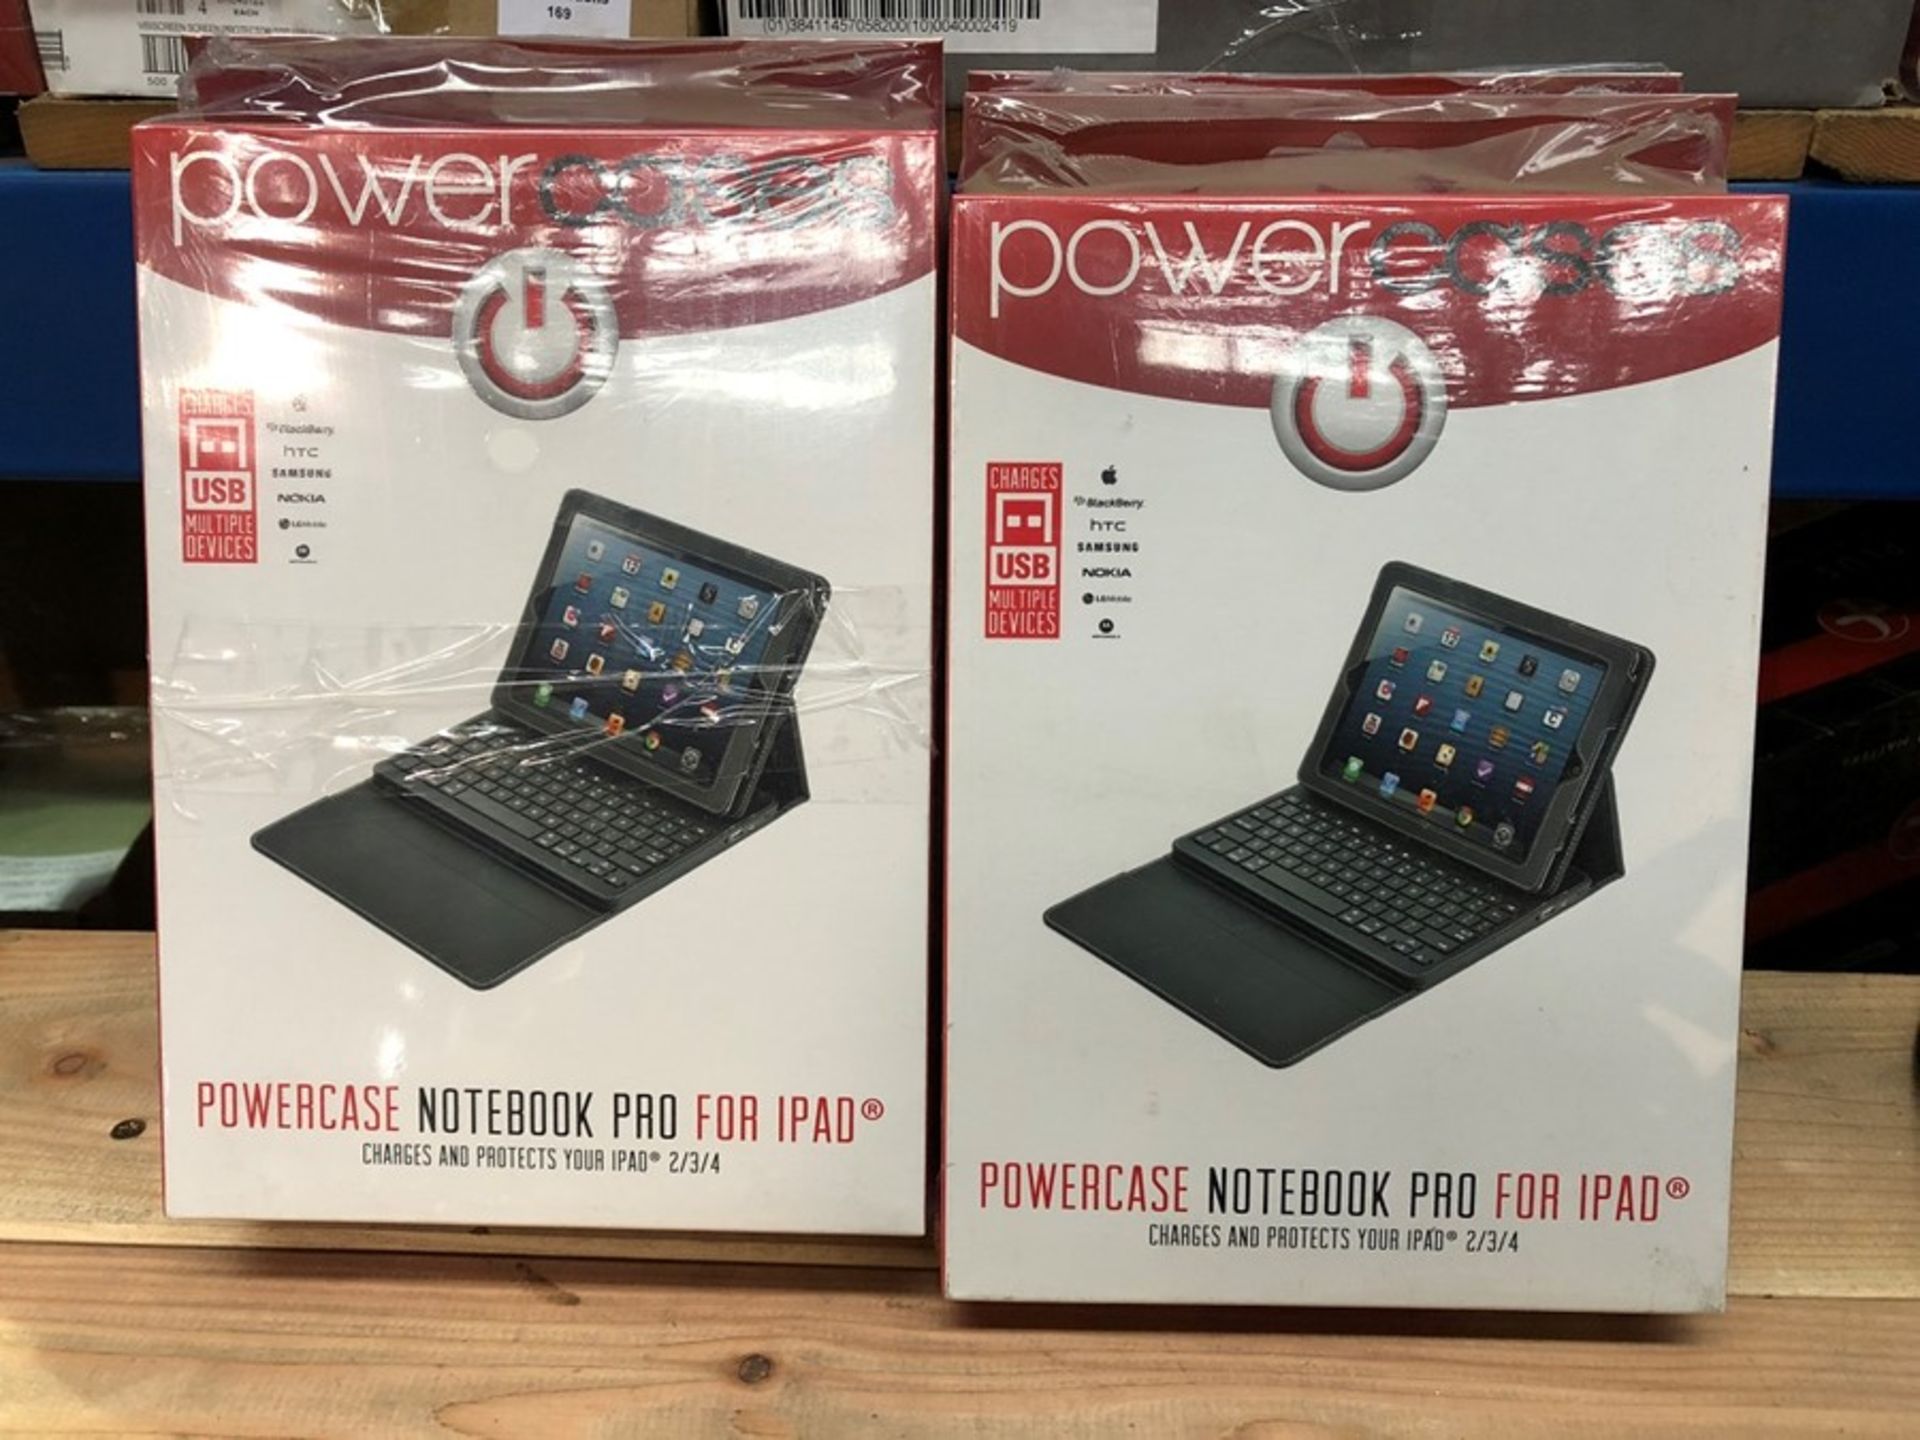 1 LOT TO CONTAIN 4 POWERCASES POWERCASE NOTEBOOK PRO FOR IPAD 2/3/4 - COMES WITH KEYBOARD / RRP £